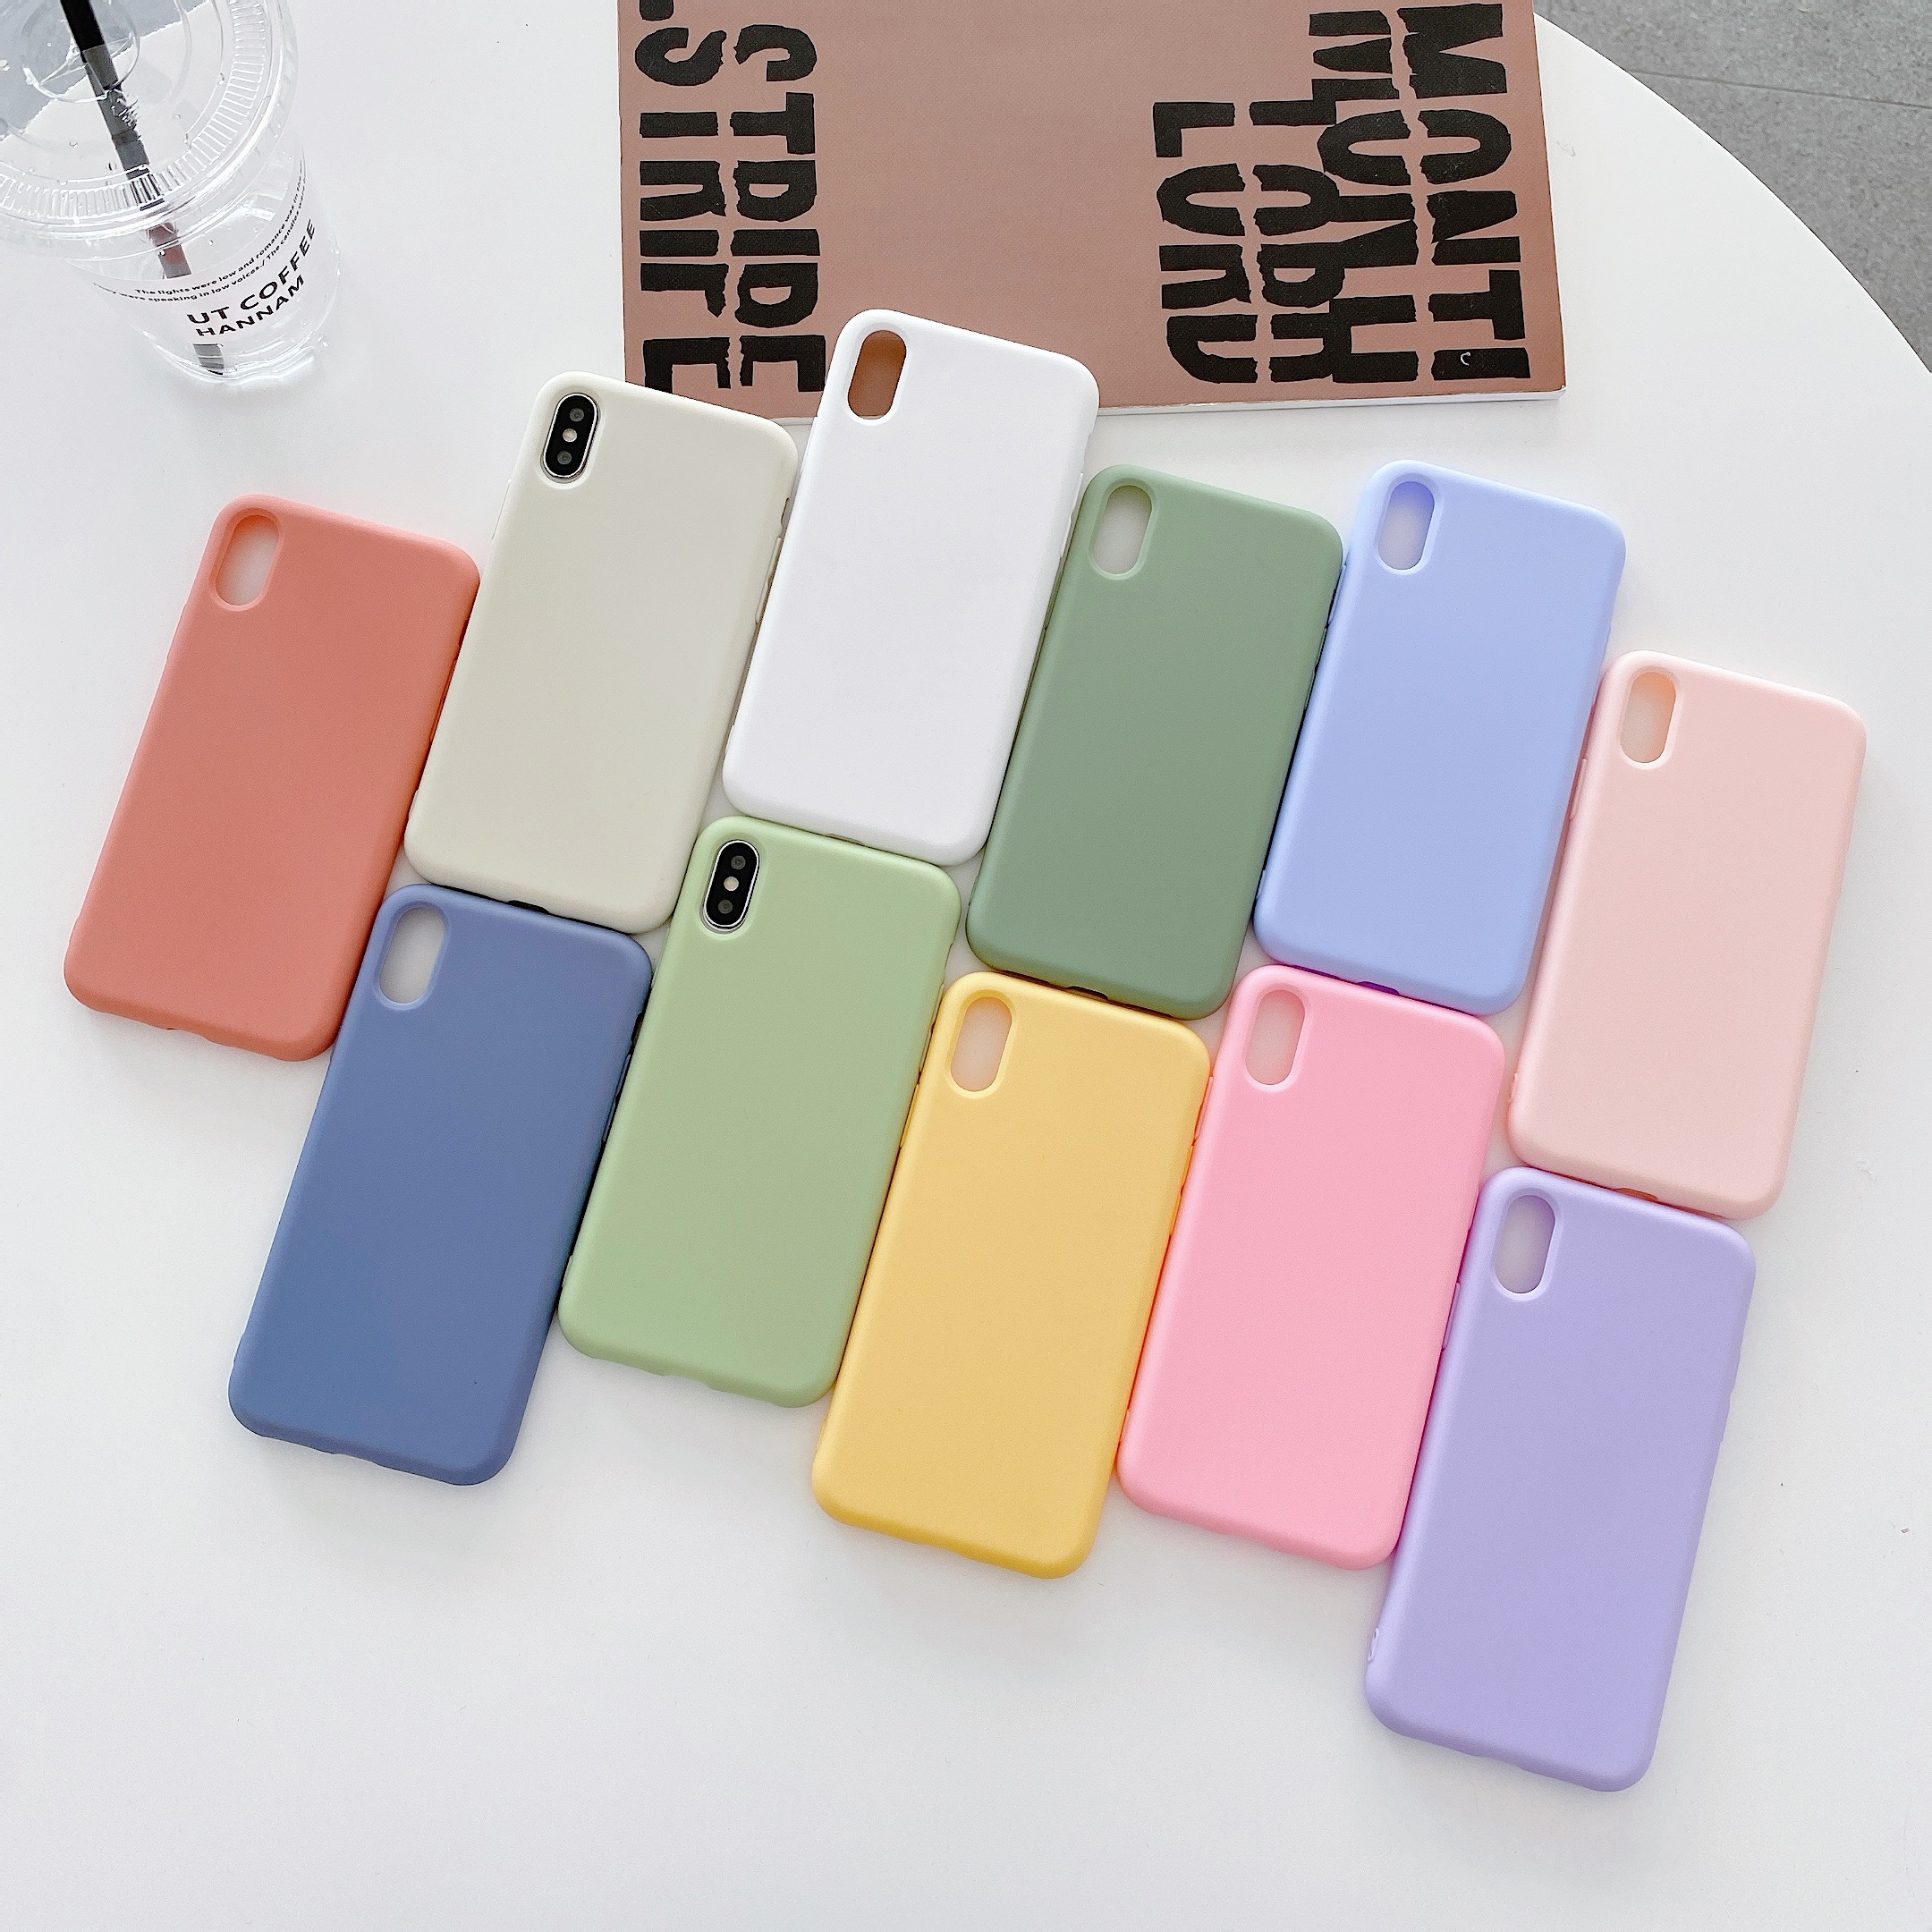 

Soft Tpu Basic Case For 15/14/13/12/11/xr/x/8/7 Plus Pro Max - Matte Finish Full Body Protective Cover With Large Port Cutouts In Candy Colors